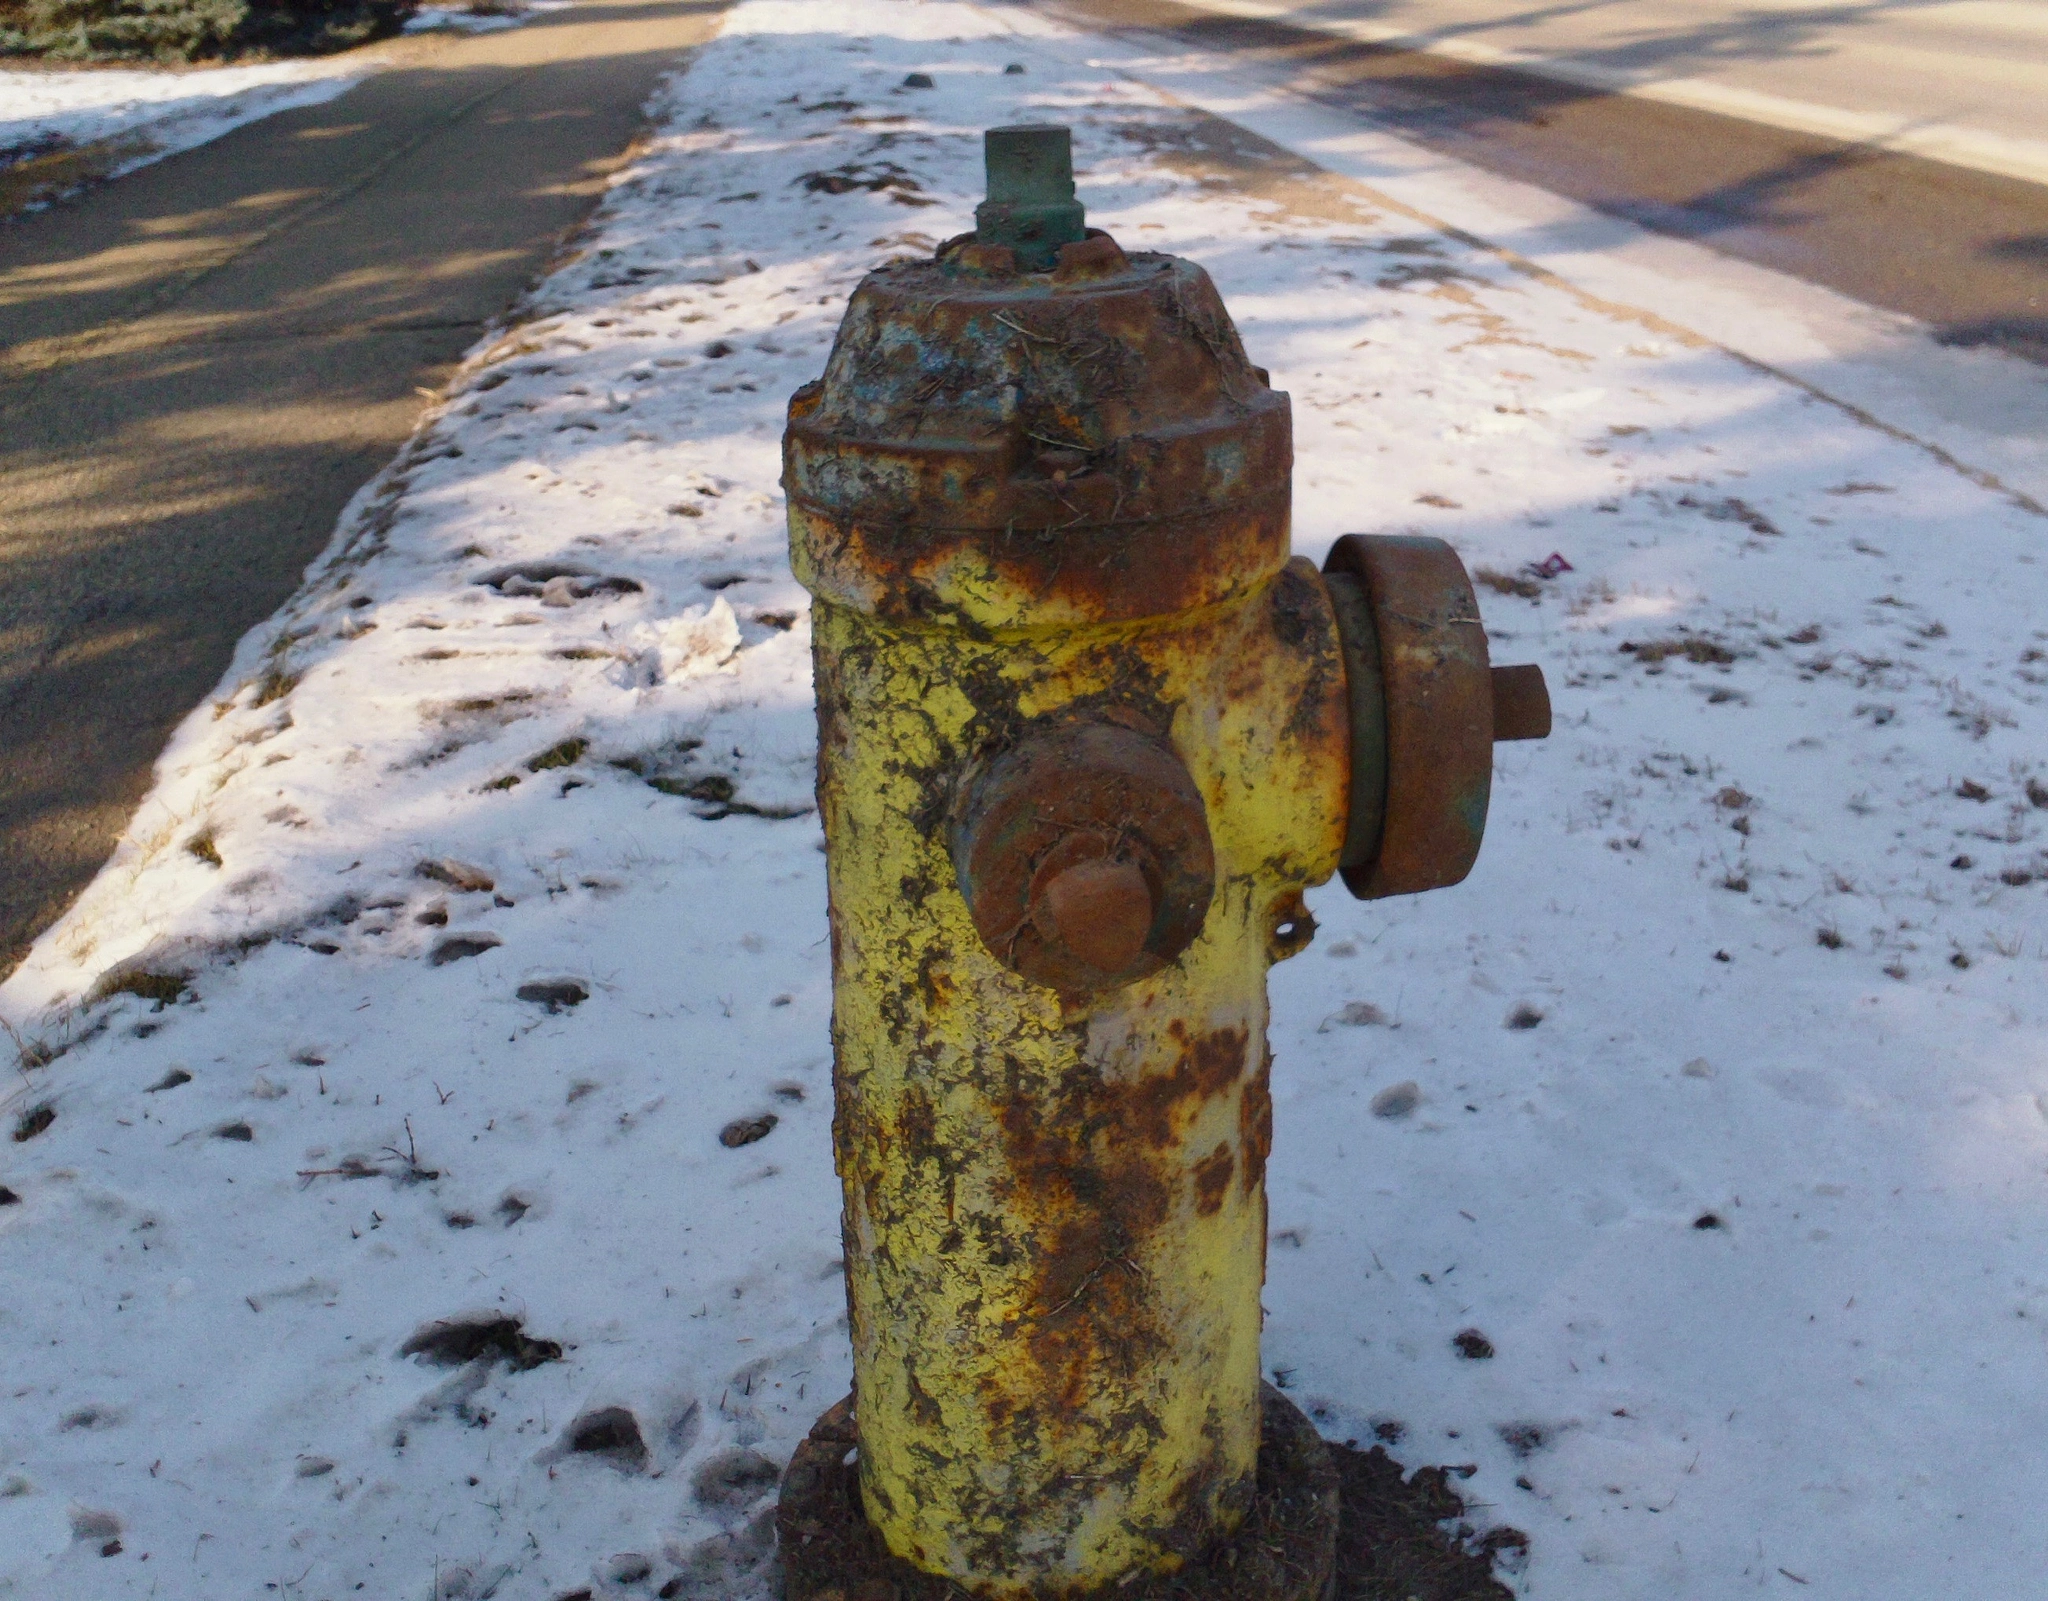 Samsung HMX-W300 sample photo. Old yellow fire hydrant photography